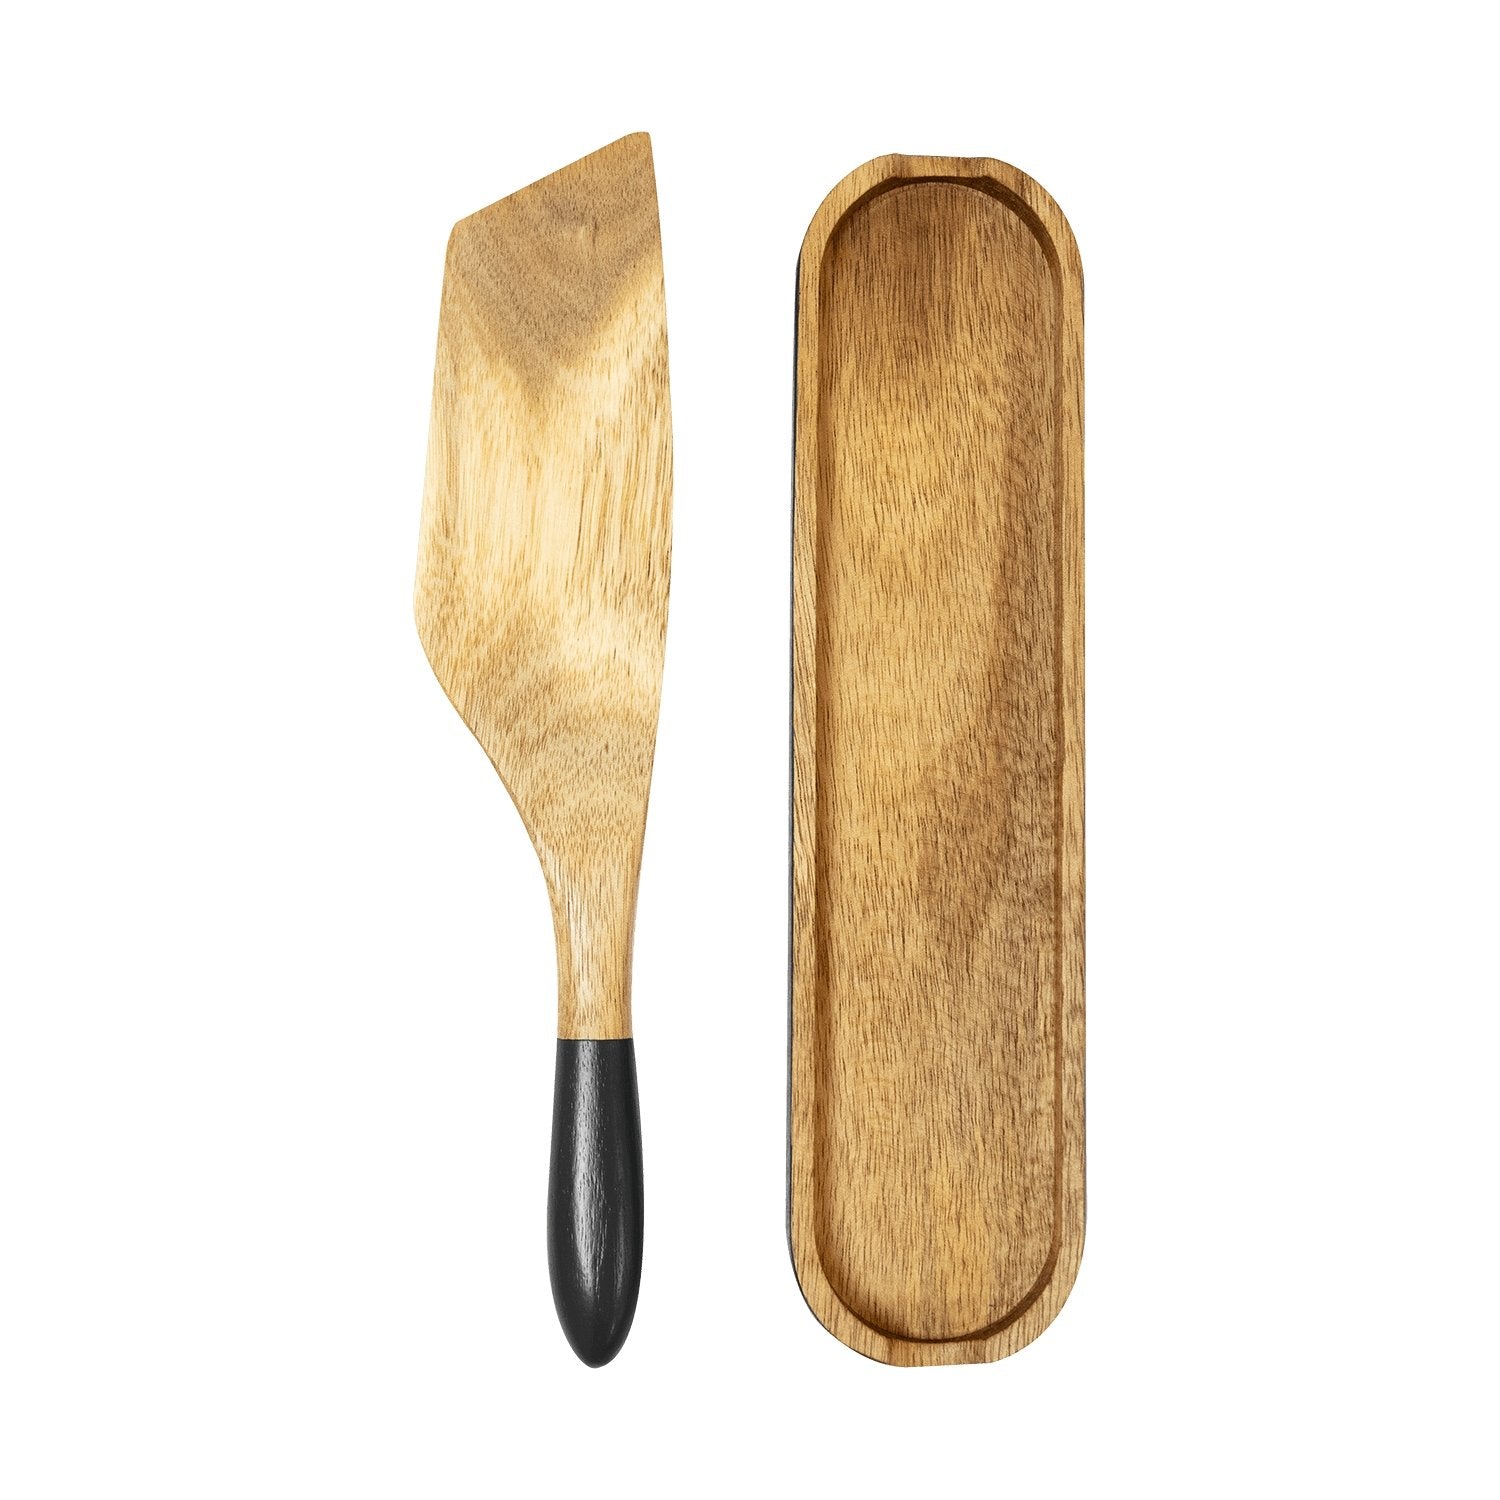 Mad Hungry 2-Piece Acacia Wood Spurtle Set, Natural